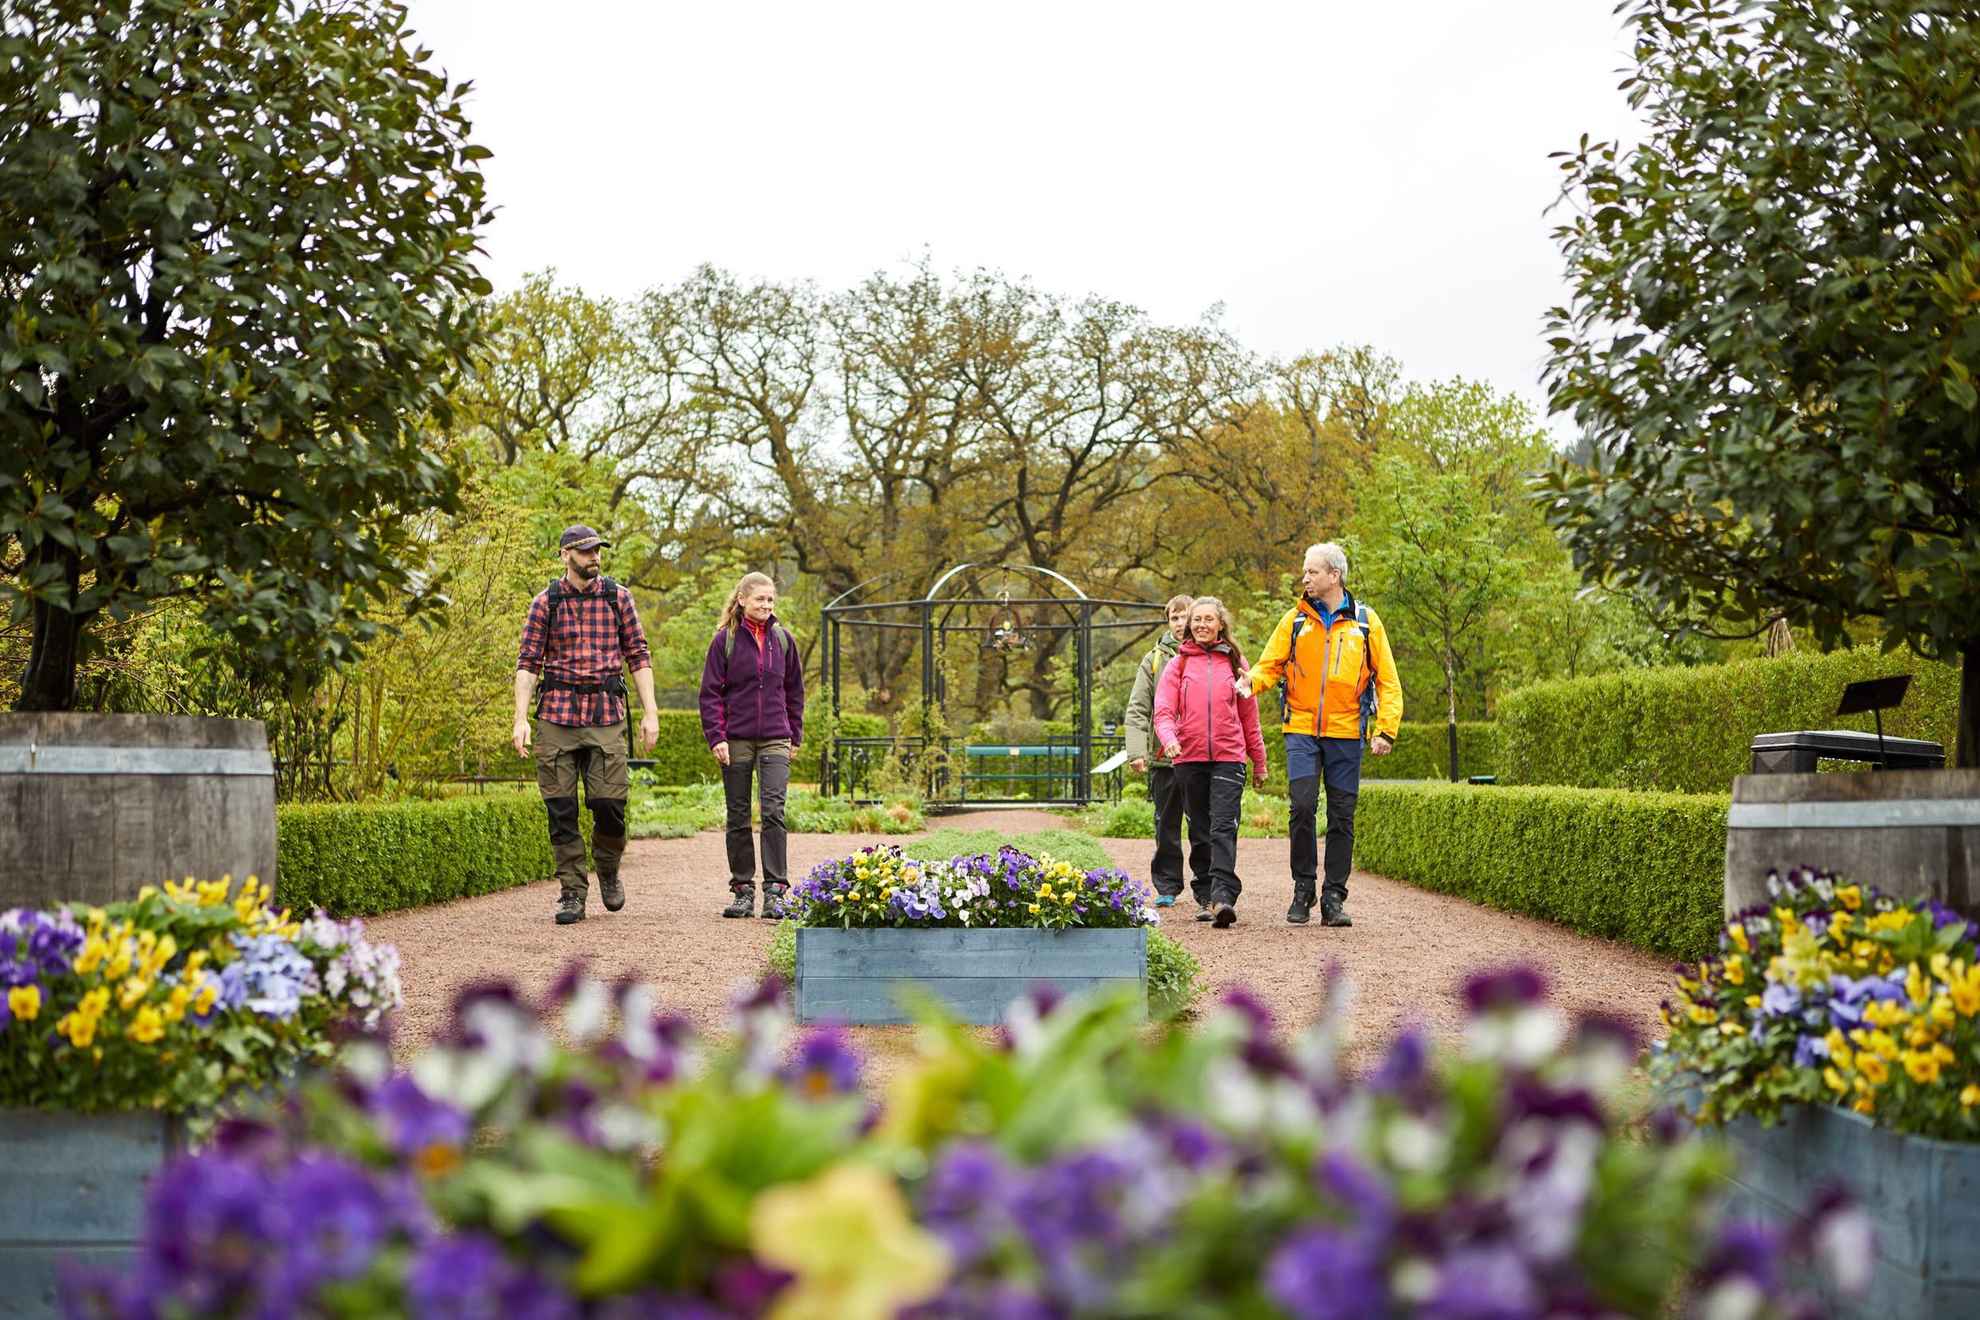 A group of five people walking in a beautiful arranged garden. Purple and yellow flowers in the front edge of the picture. In the background you see trees and greenery.